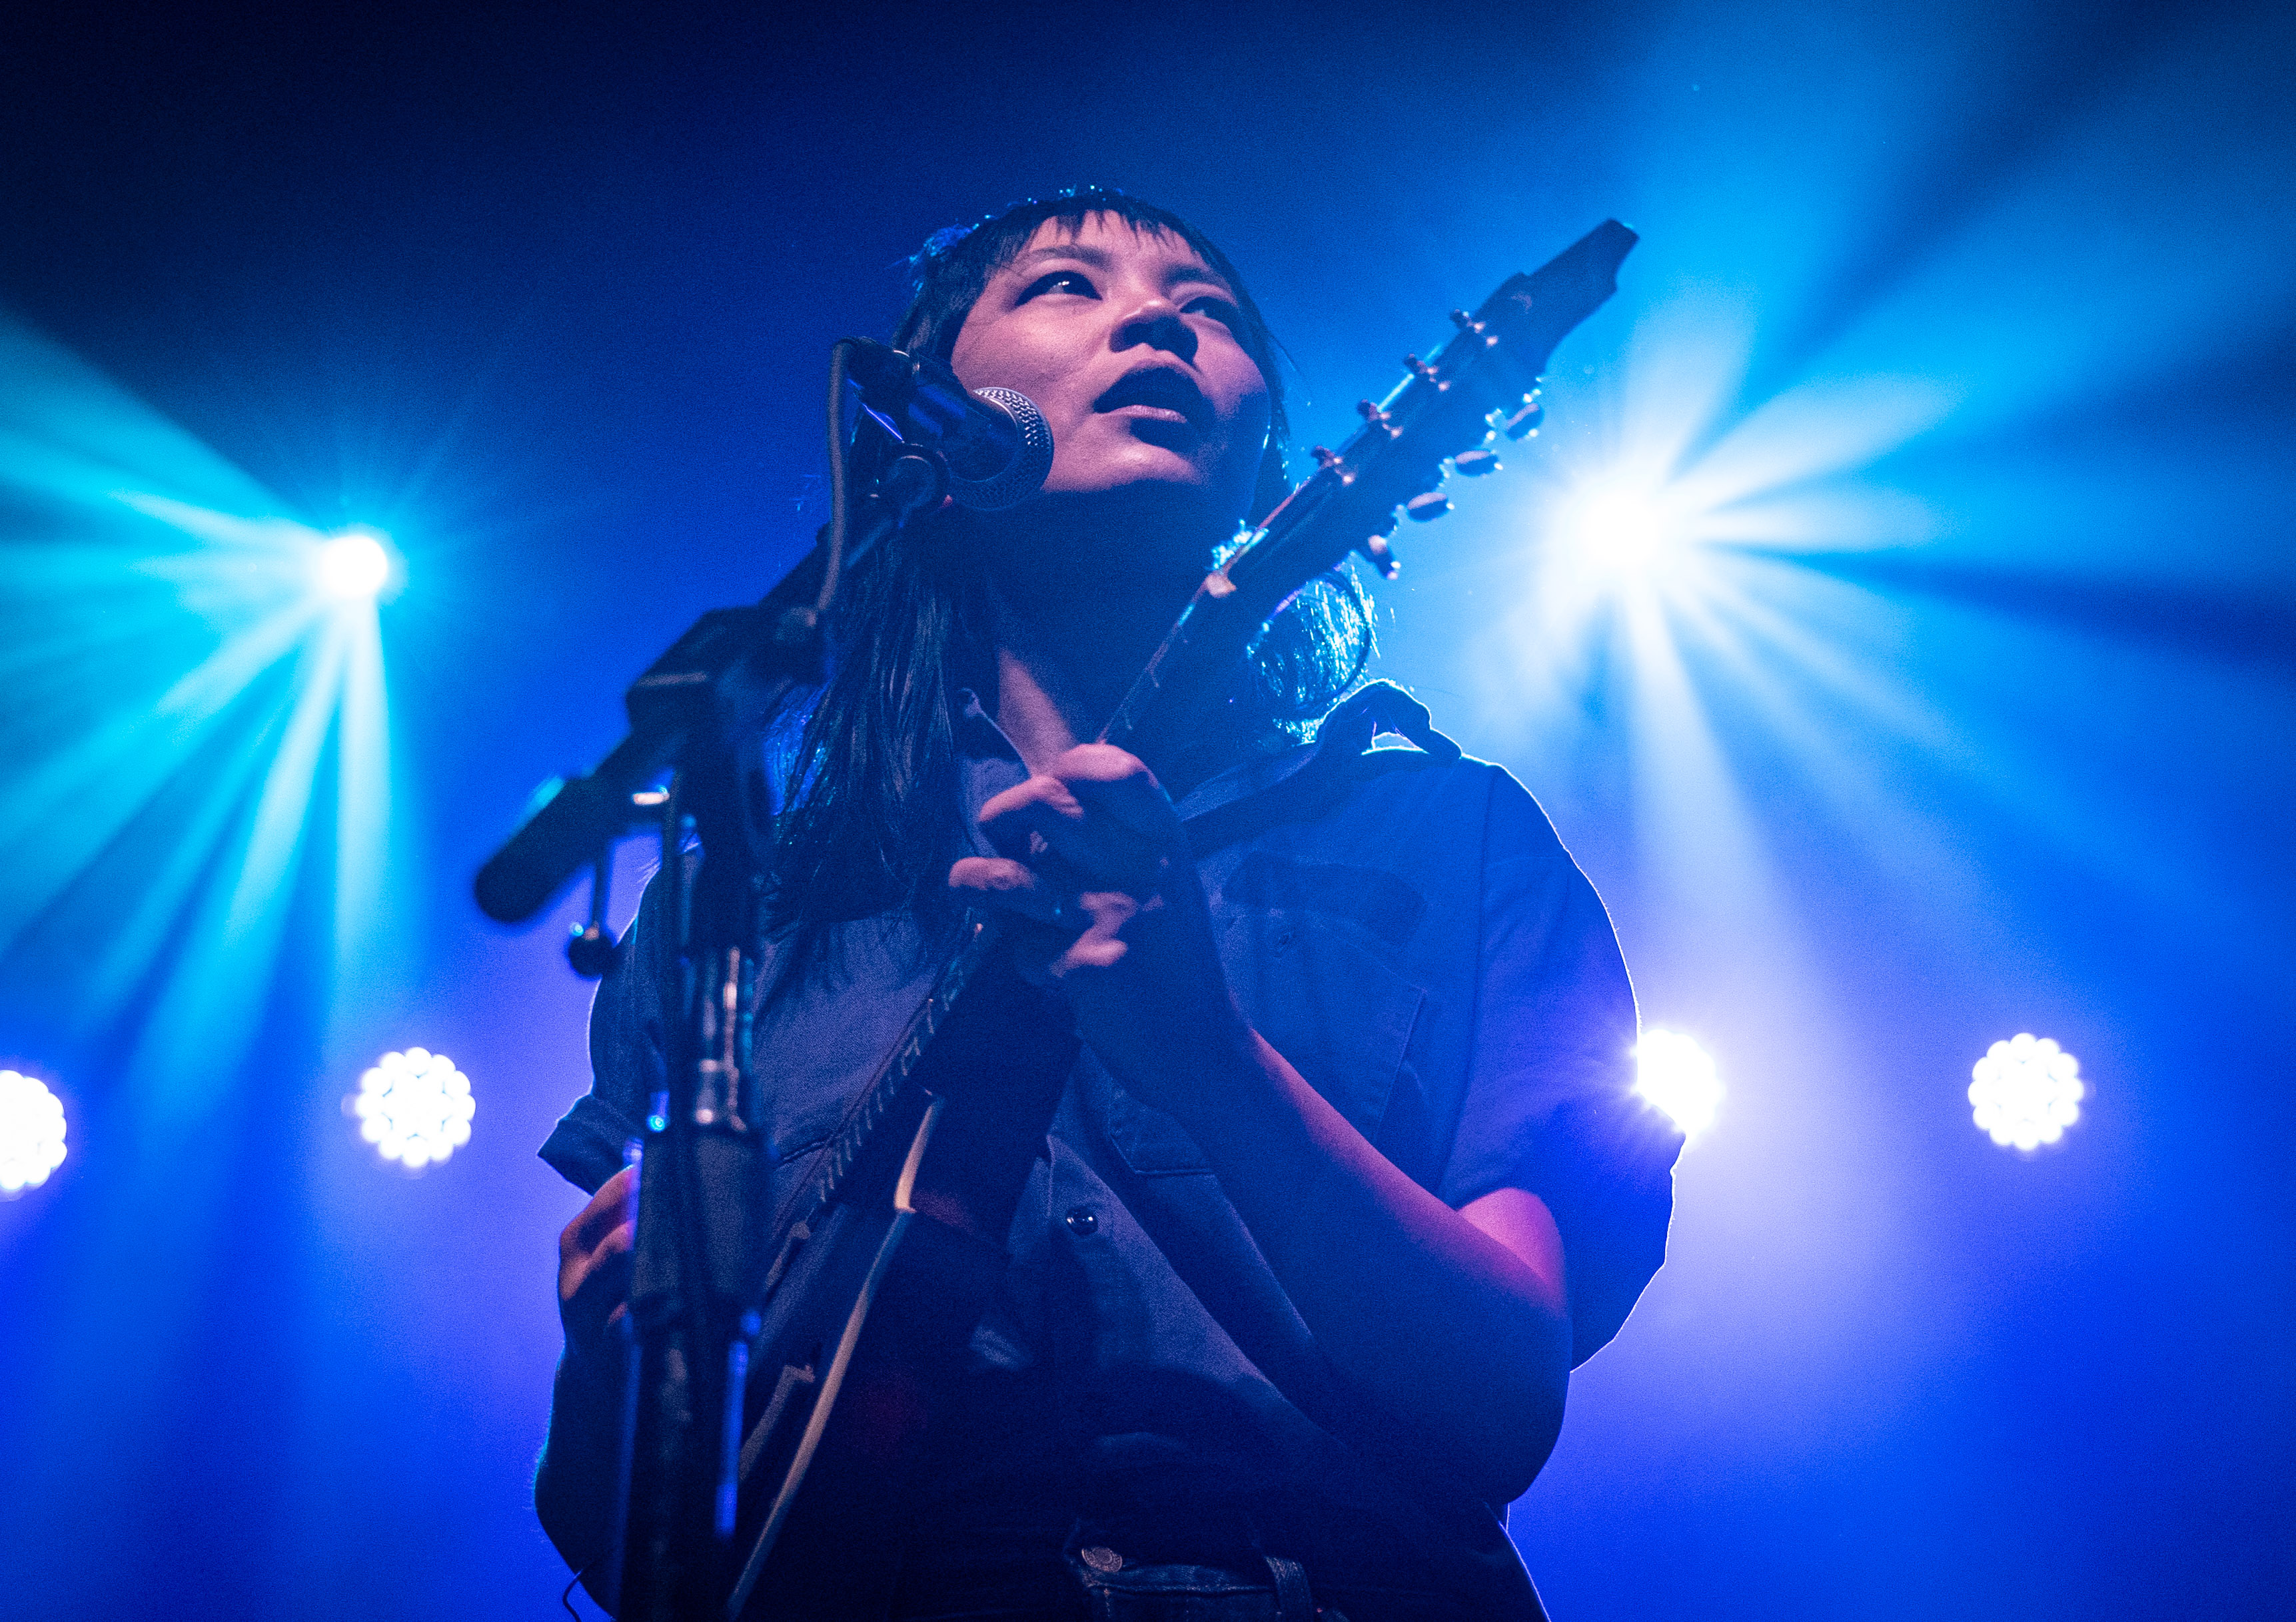 Thao and The Get Down Stay Down at First Avenue on September 24, 2021